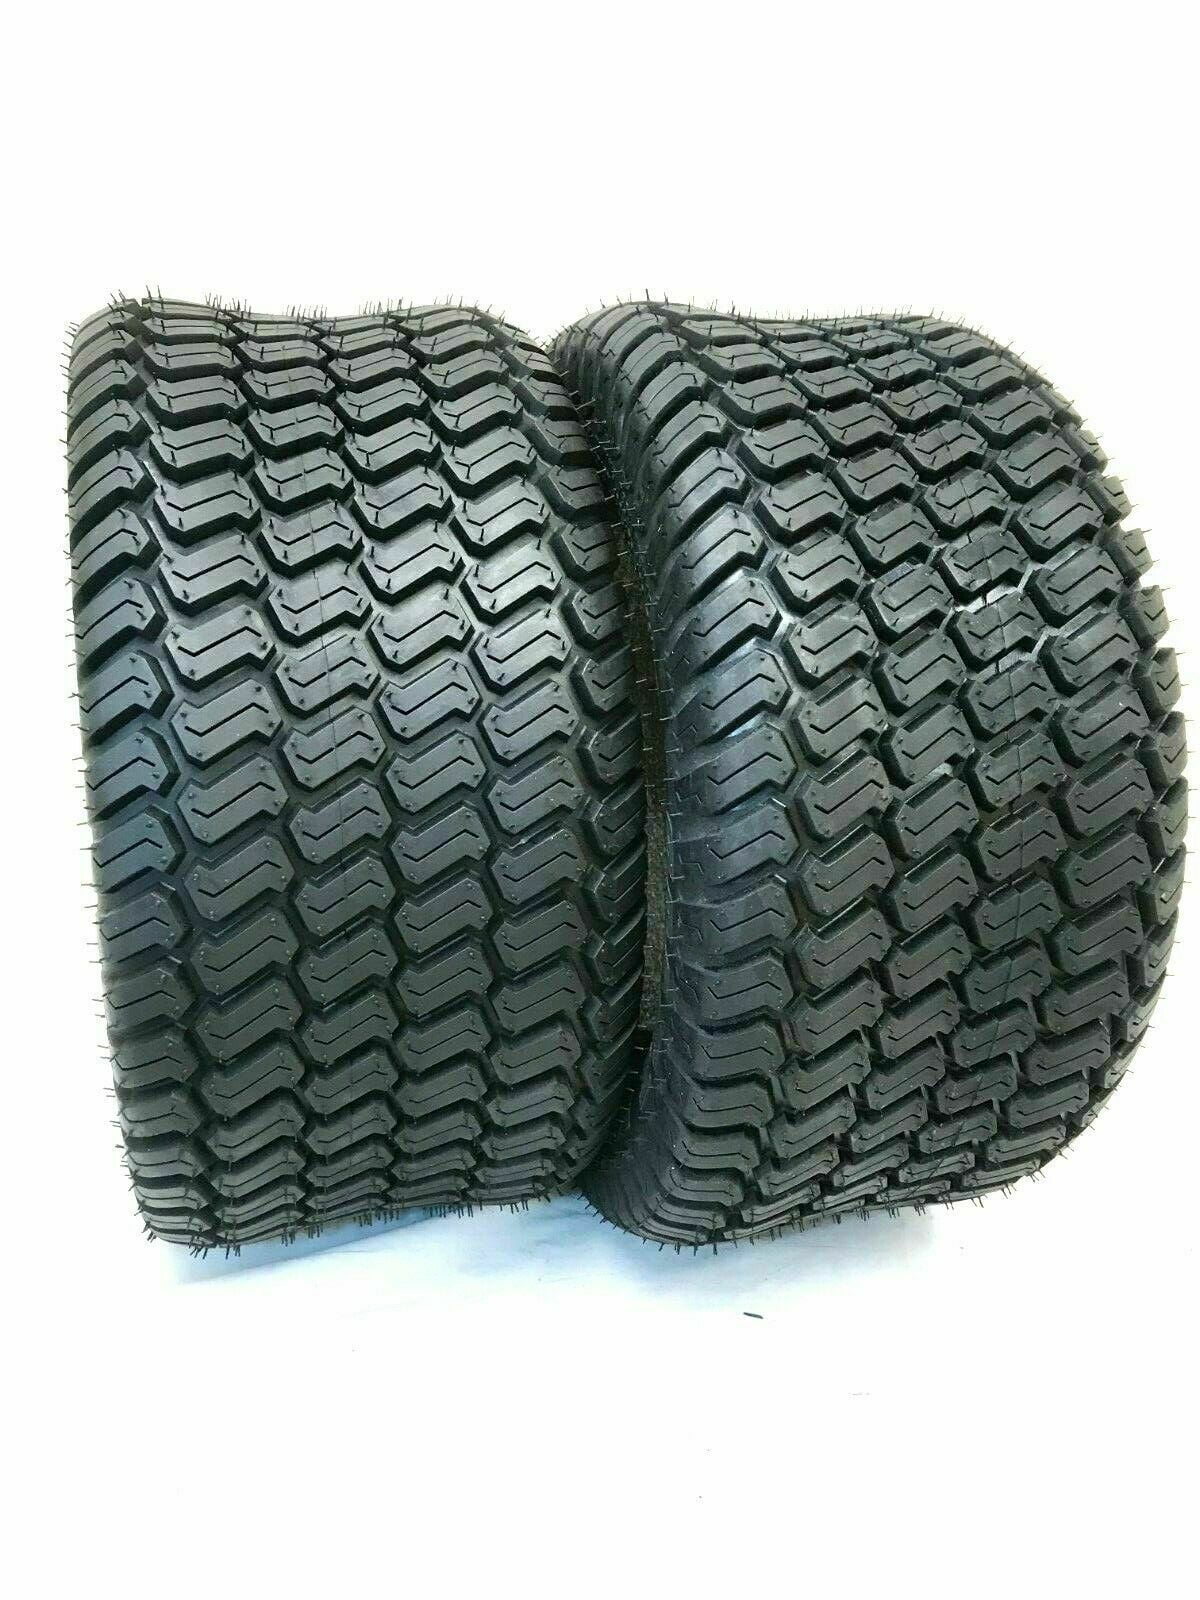 16x650x8 16x6.50x8 16x6.50-8  TURF TIRES 4 Ply Tubeless Tractor Rider Mower 2 